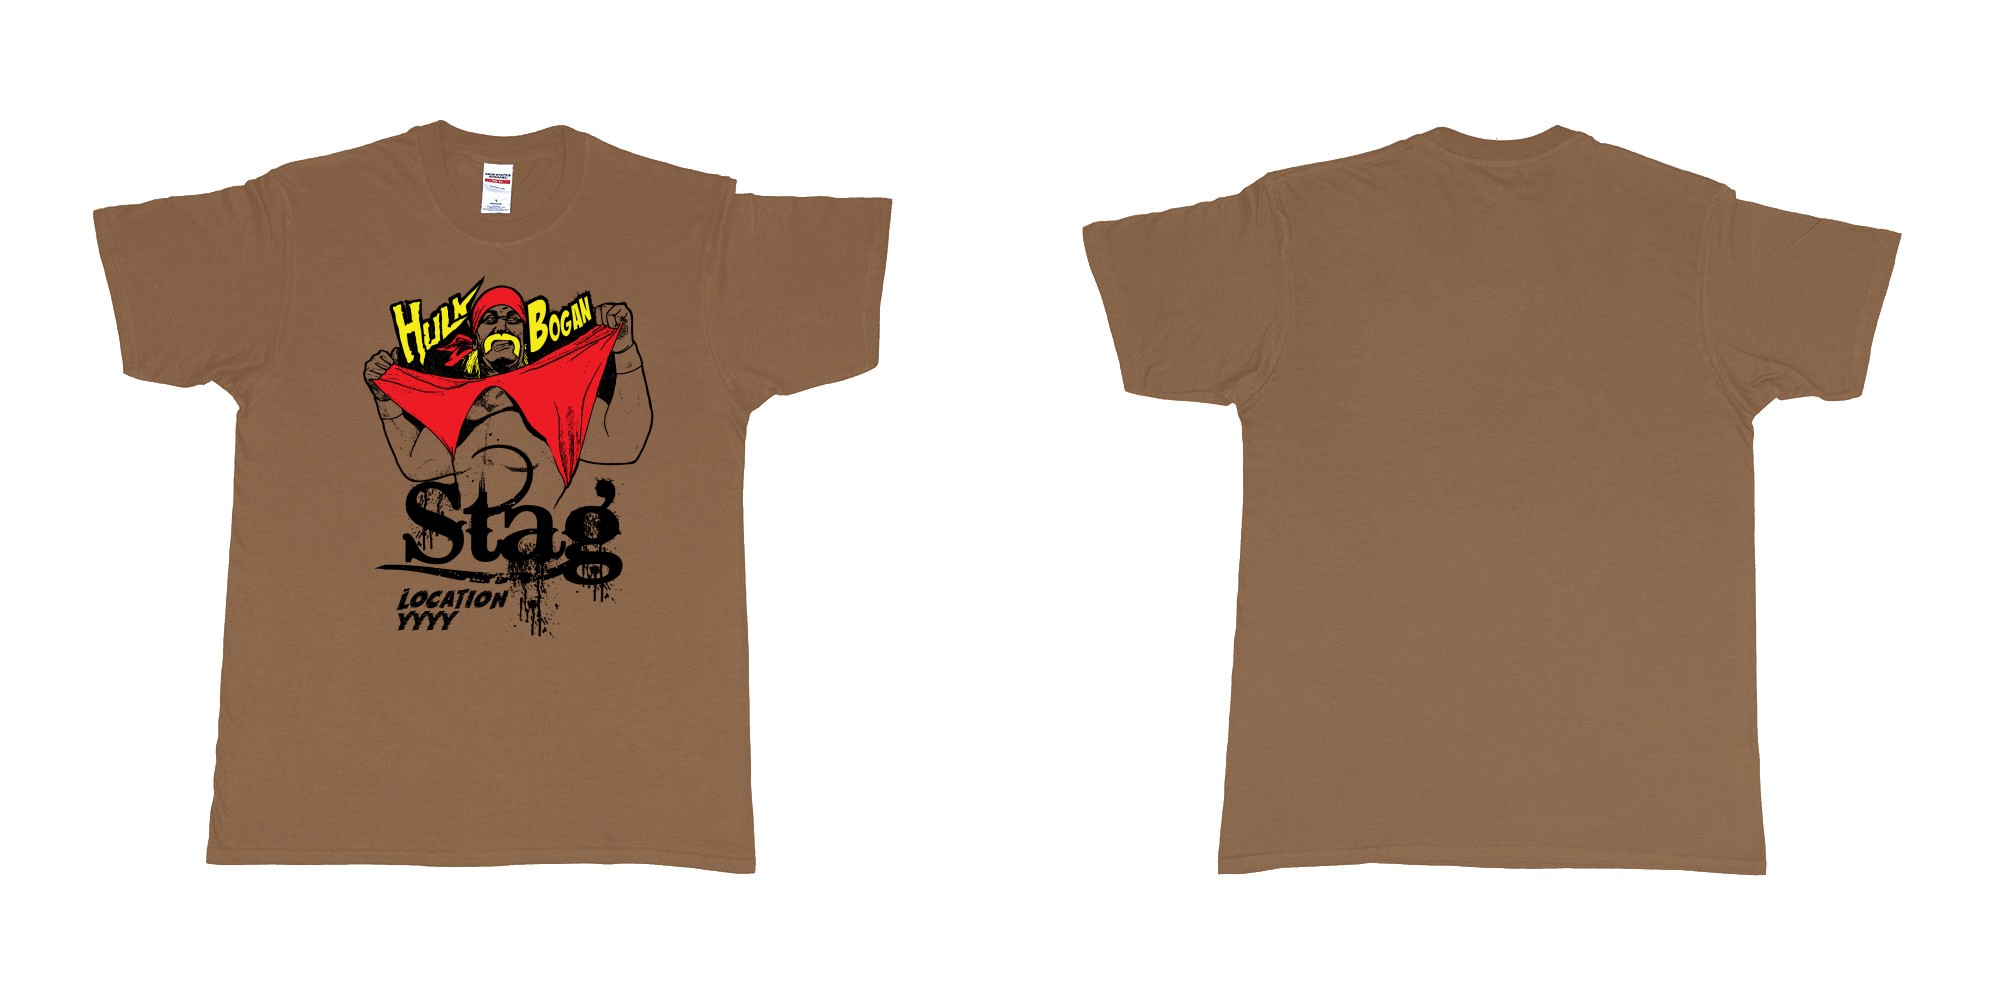 Custom tshirt design hulk hogan bogan in fabric color chestnut choice your own text made in Bali by The Pirate Way